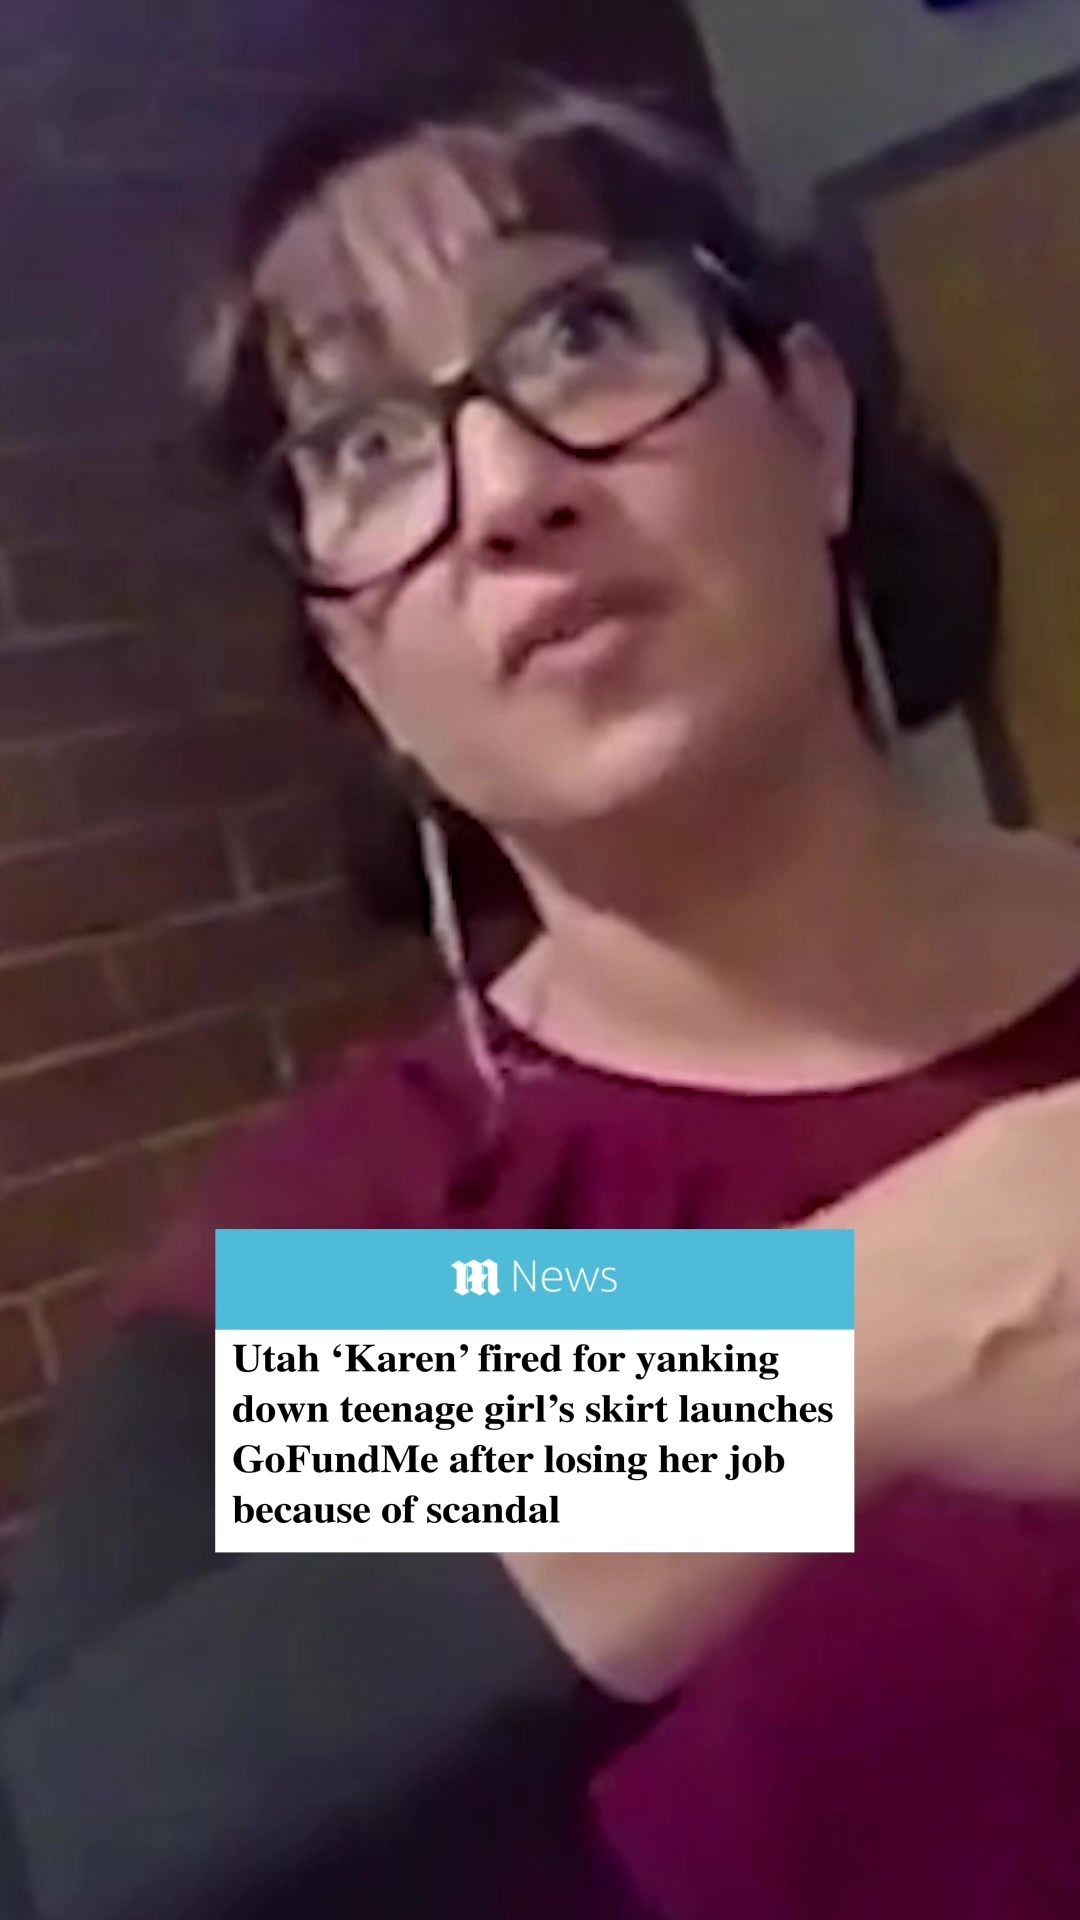 A woman charged with s*xual battery after pulling down a teenager’s skirt at a restaurant has turned to GoFundMe since losing her job. Ida Lorenzo, 48, was terminated from her role at the Utah Attorney General's Office, the day she was charged. Lorenzo says her termination was due to 'circumstances beyond my control' and is looking to earn extra cash as a single mother of two. 🎥 @ccsnowwww via TikTok / St George Police Department via ABC4  #news #utah #karen #crime #arrest #family #singlemom